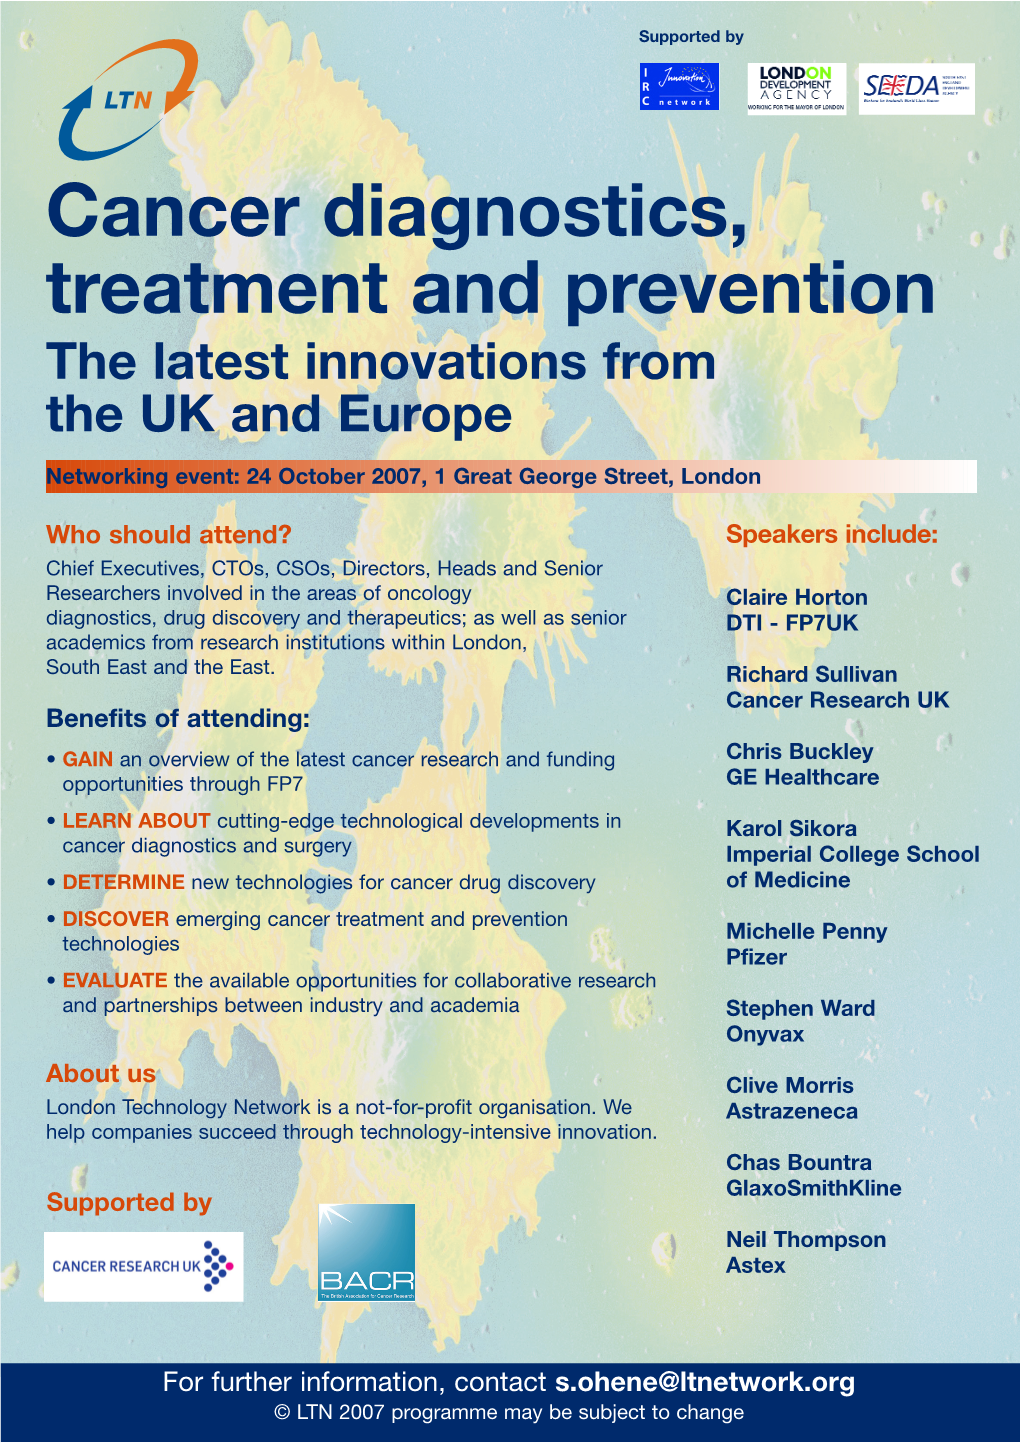 Cancer Diagnostics, Treatment and Prevention the Latest Innovations from the UK and Europe